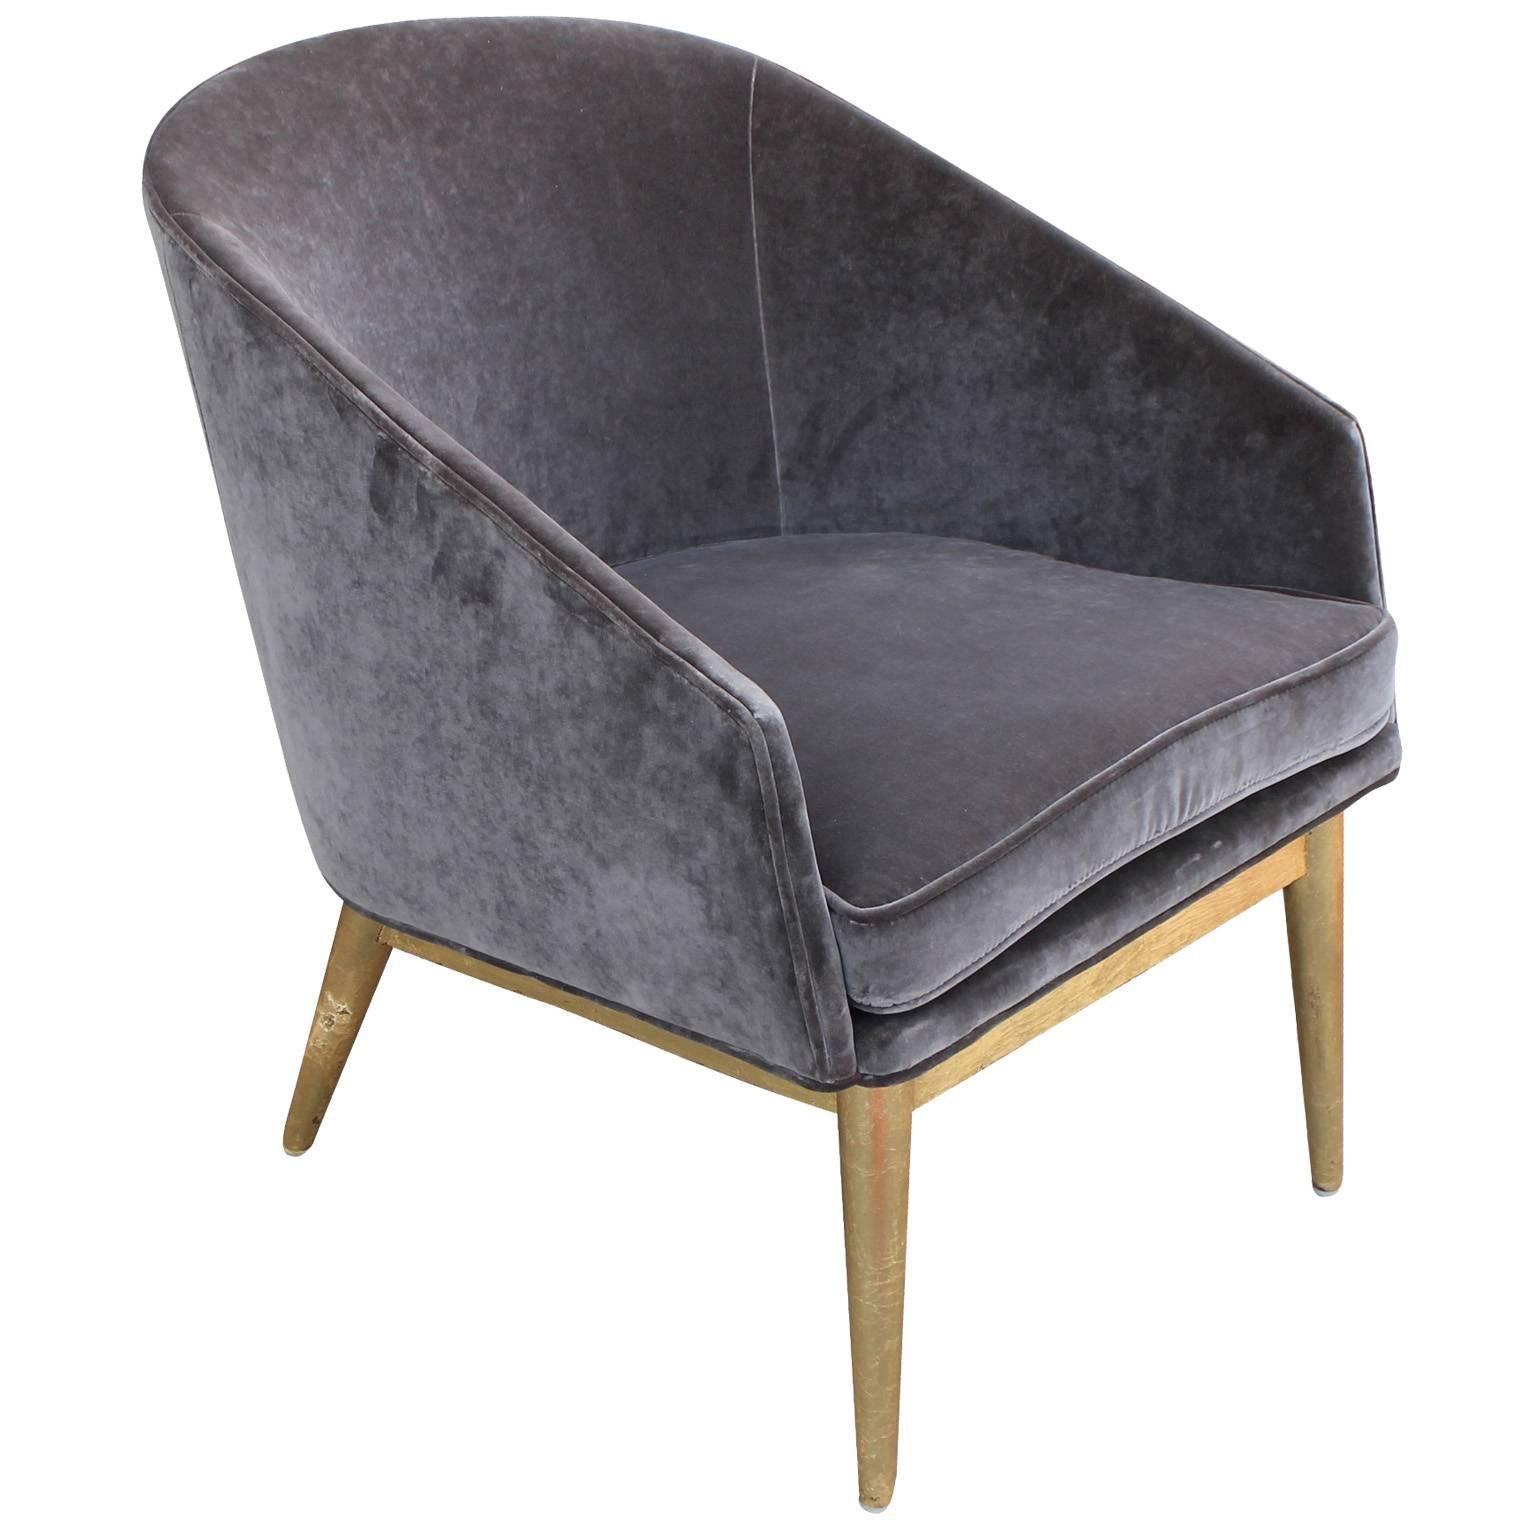 Striking pair of barrel back lounge chairs. Chairs are freshly upholstered in a luxe grey velvet. Bases are finished in gold leaf. These are a smaller scale- would be great for occasional seating or a bedroom. Stunning from every angle.